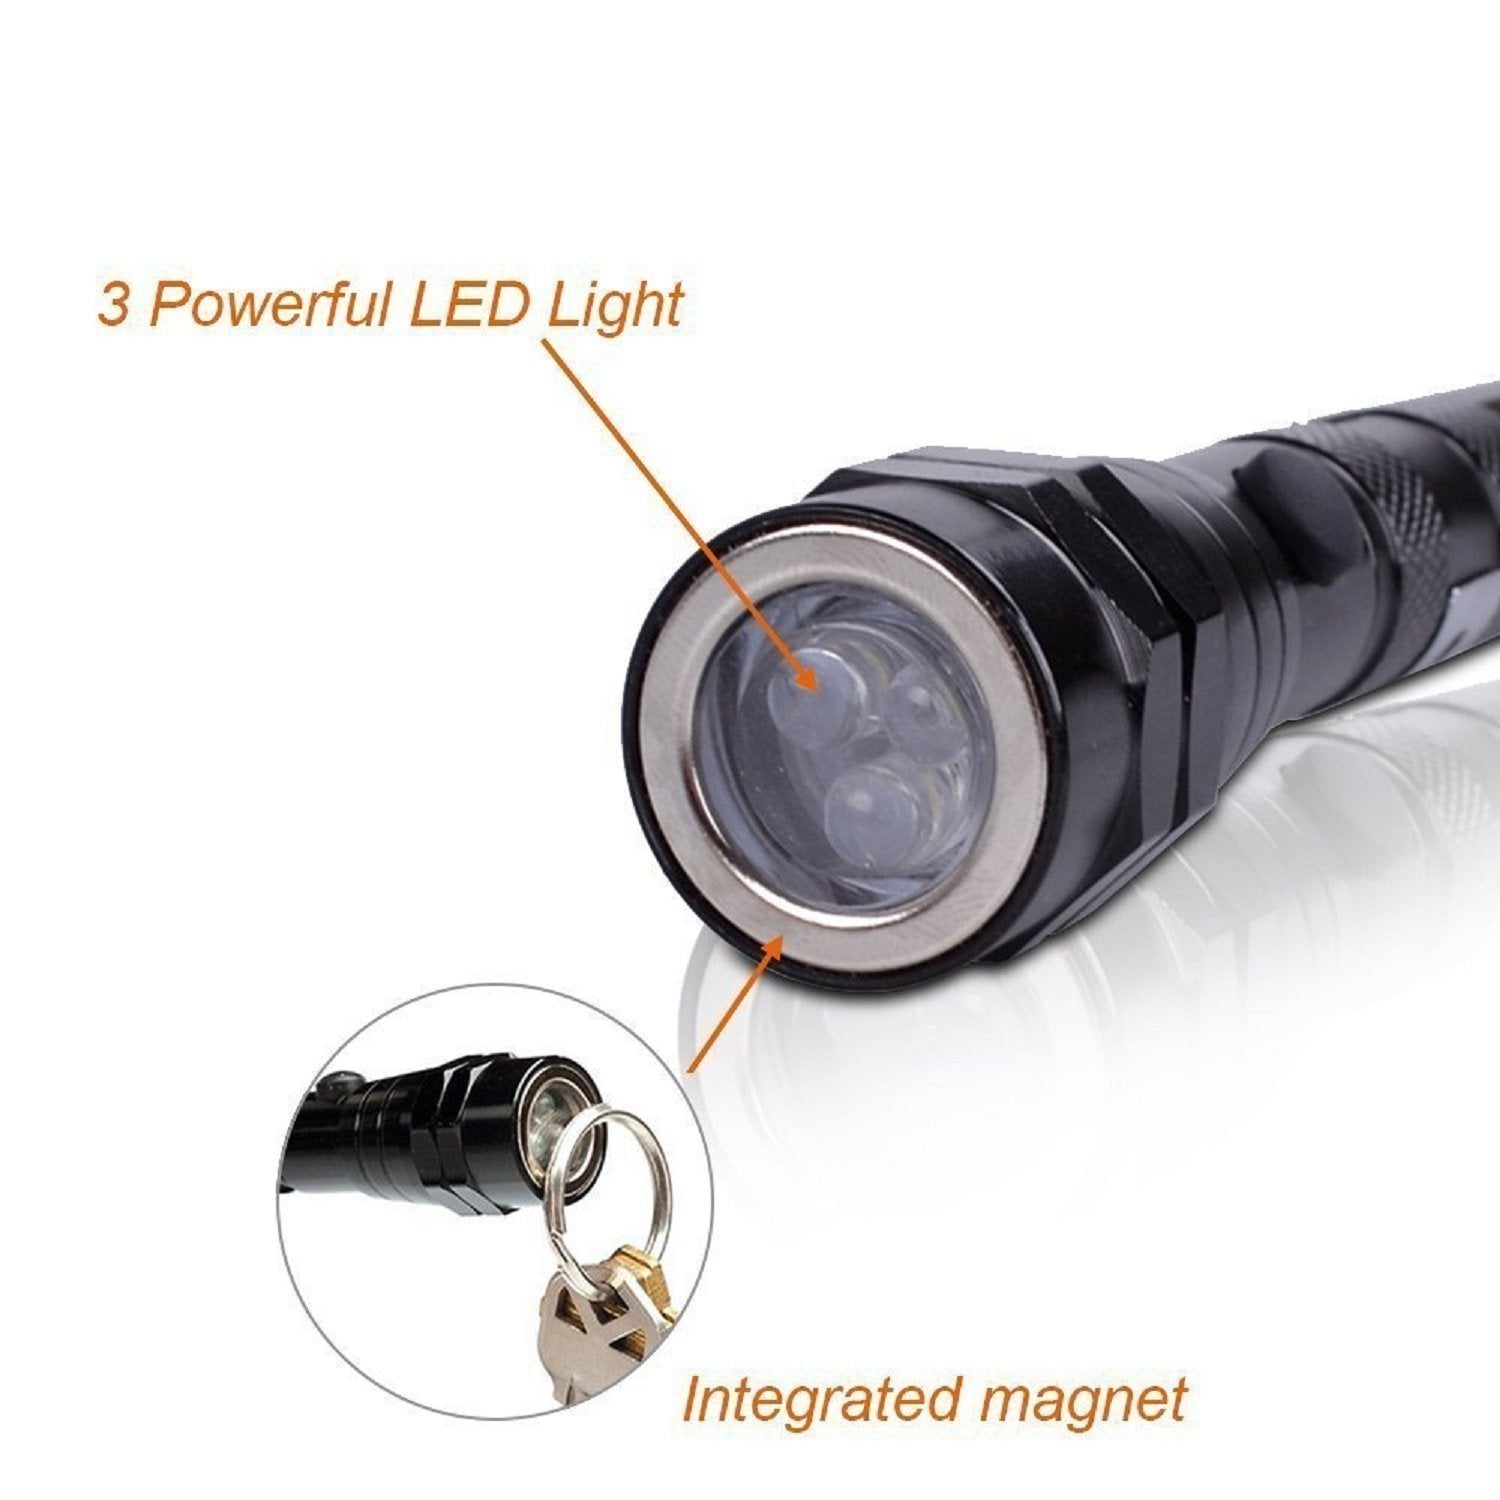 Telescopic LED Extendable Torch With Magnetic Head (Multicolor)